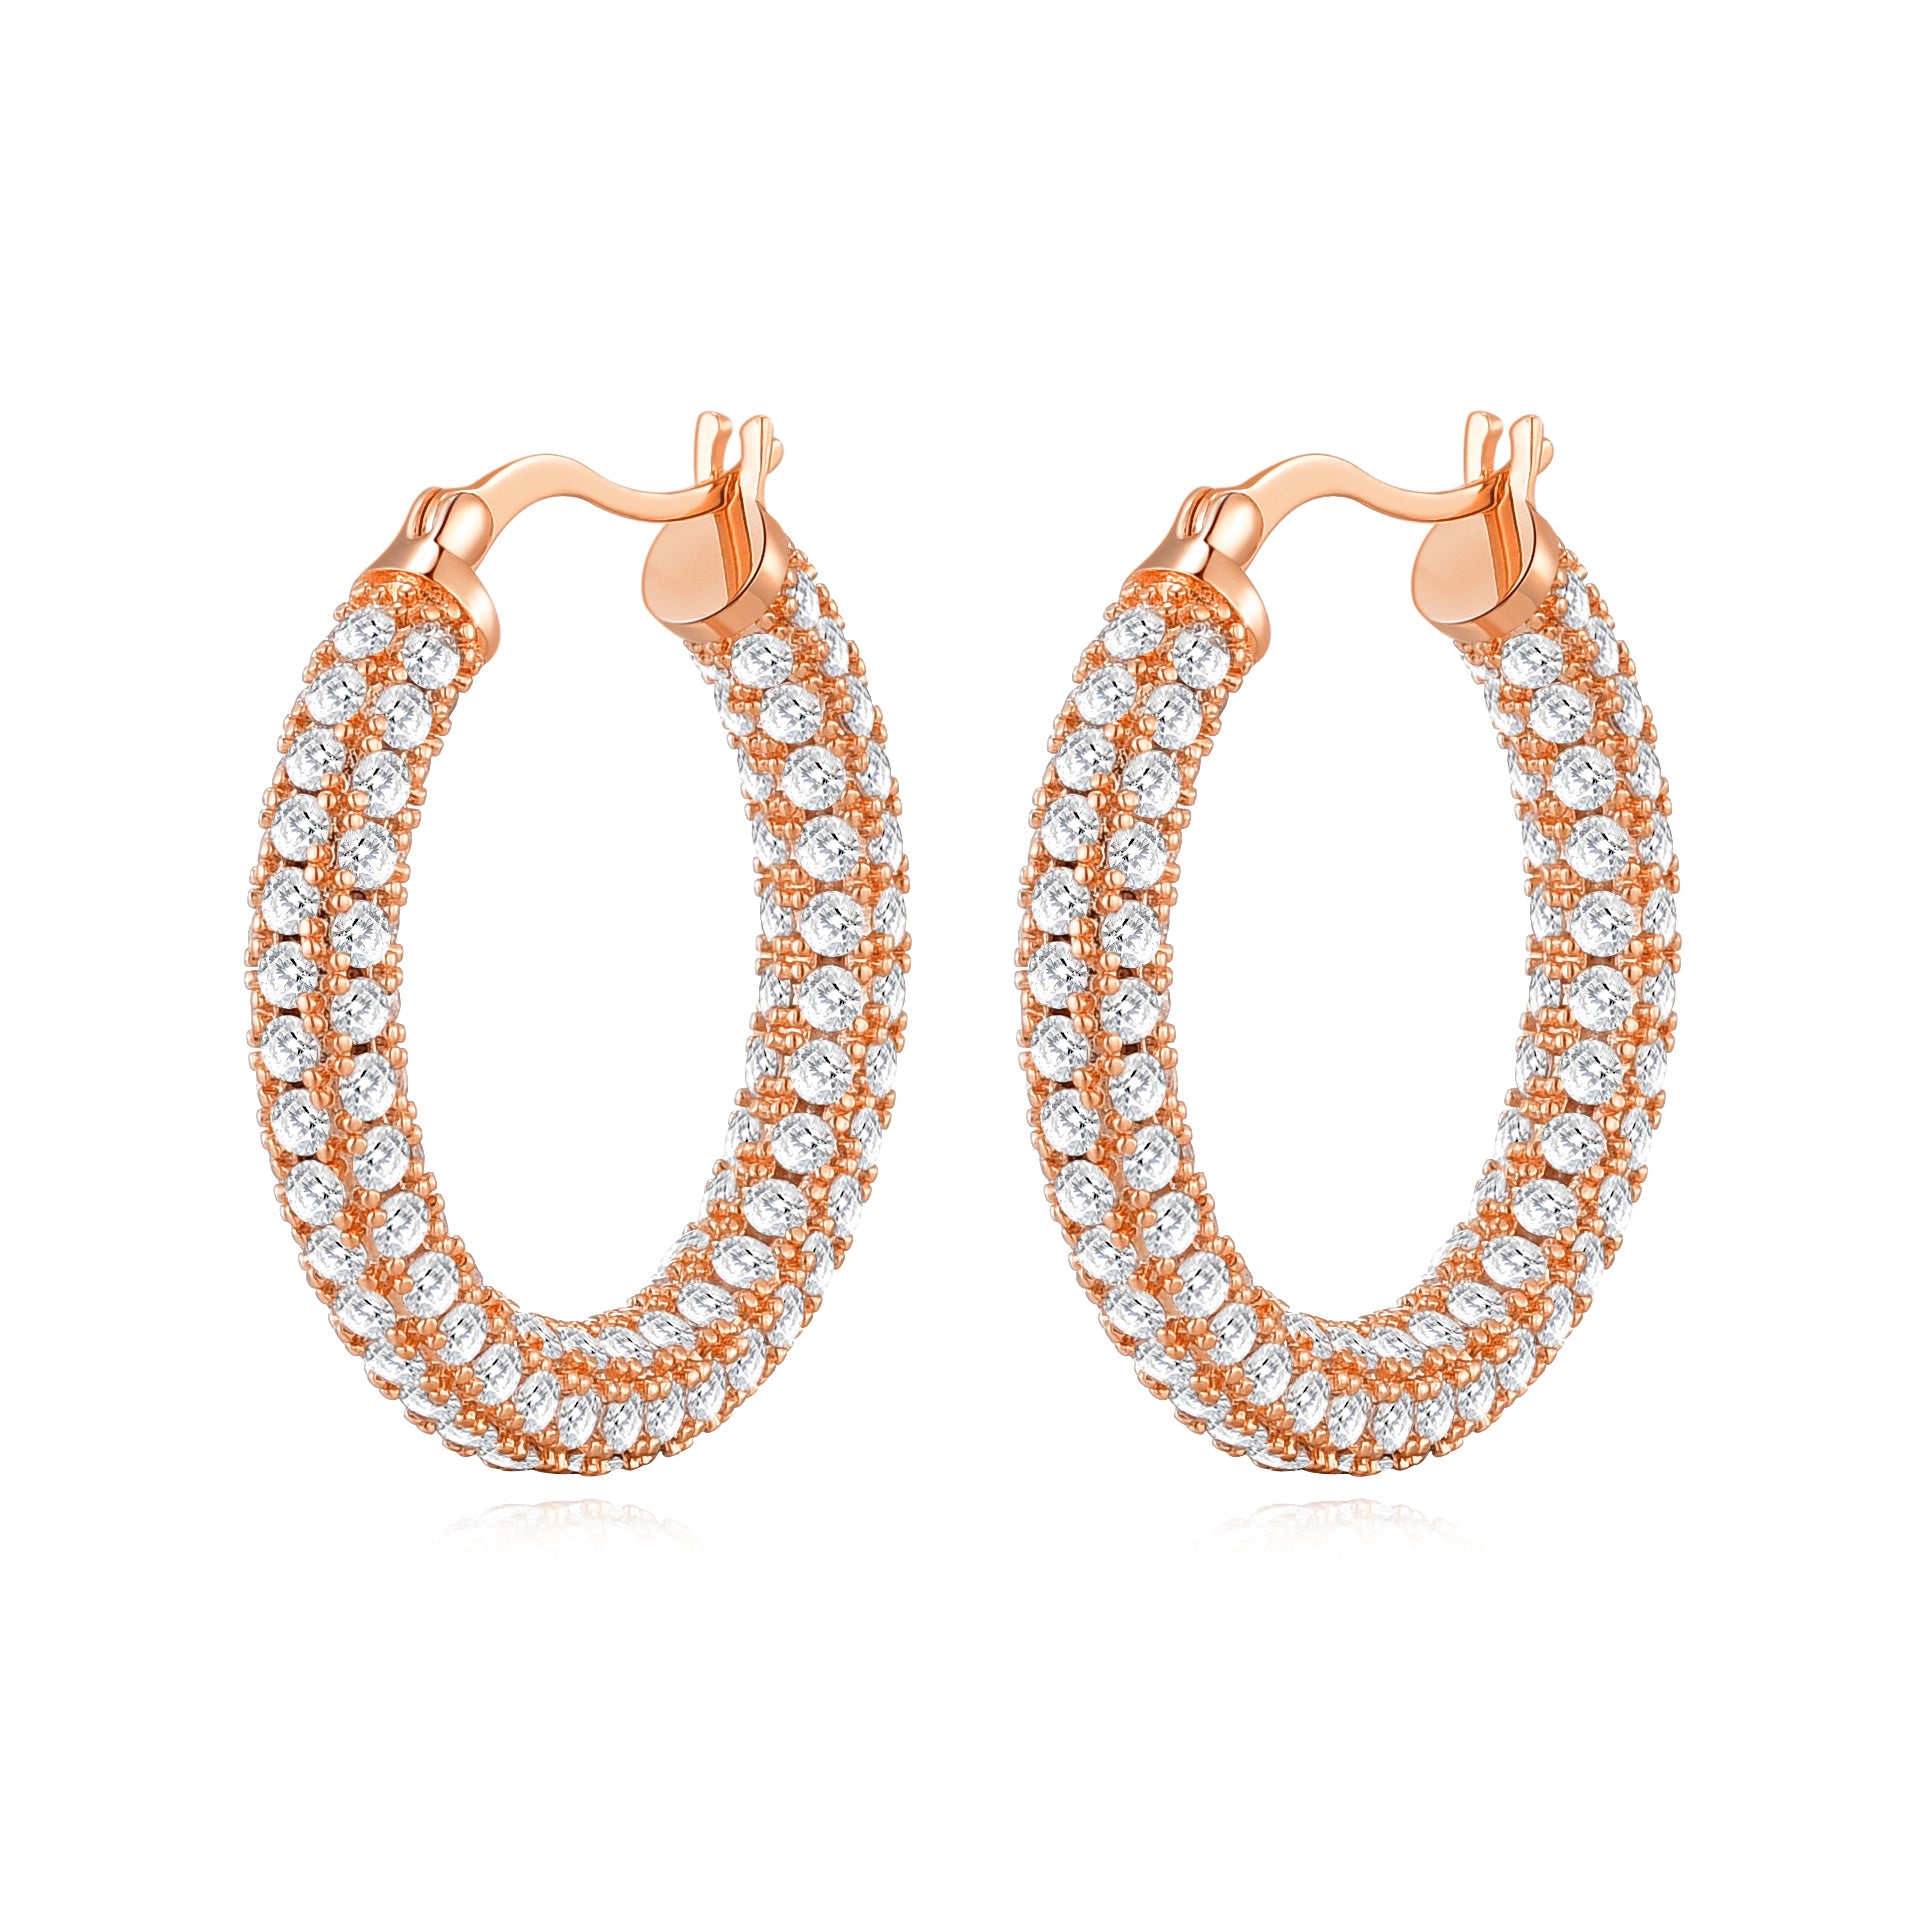 Rose Gold Plated 30mm Pave Hoop Earrings Created with Zircondia® Crystals by Philip Jones Jewellery